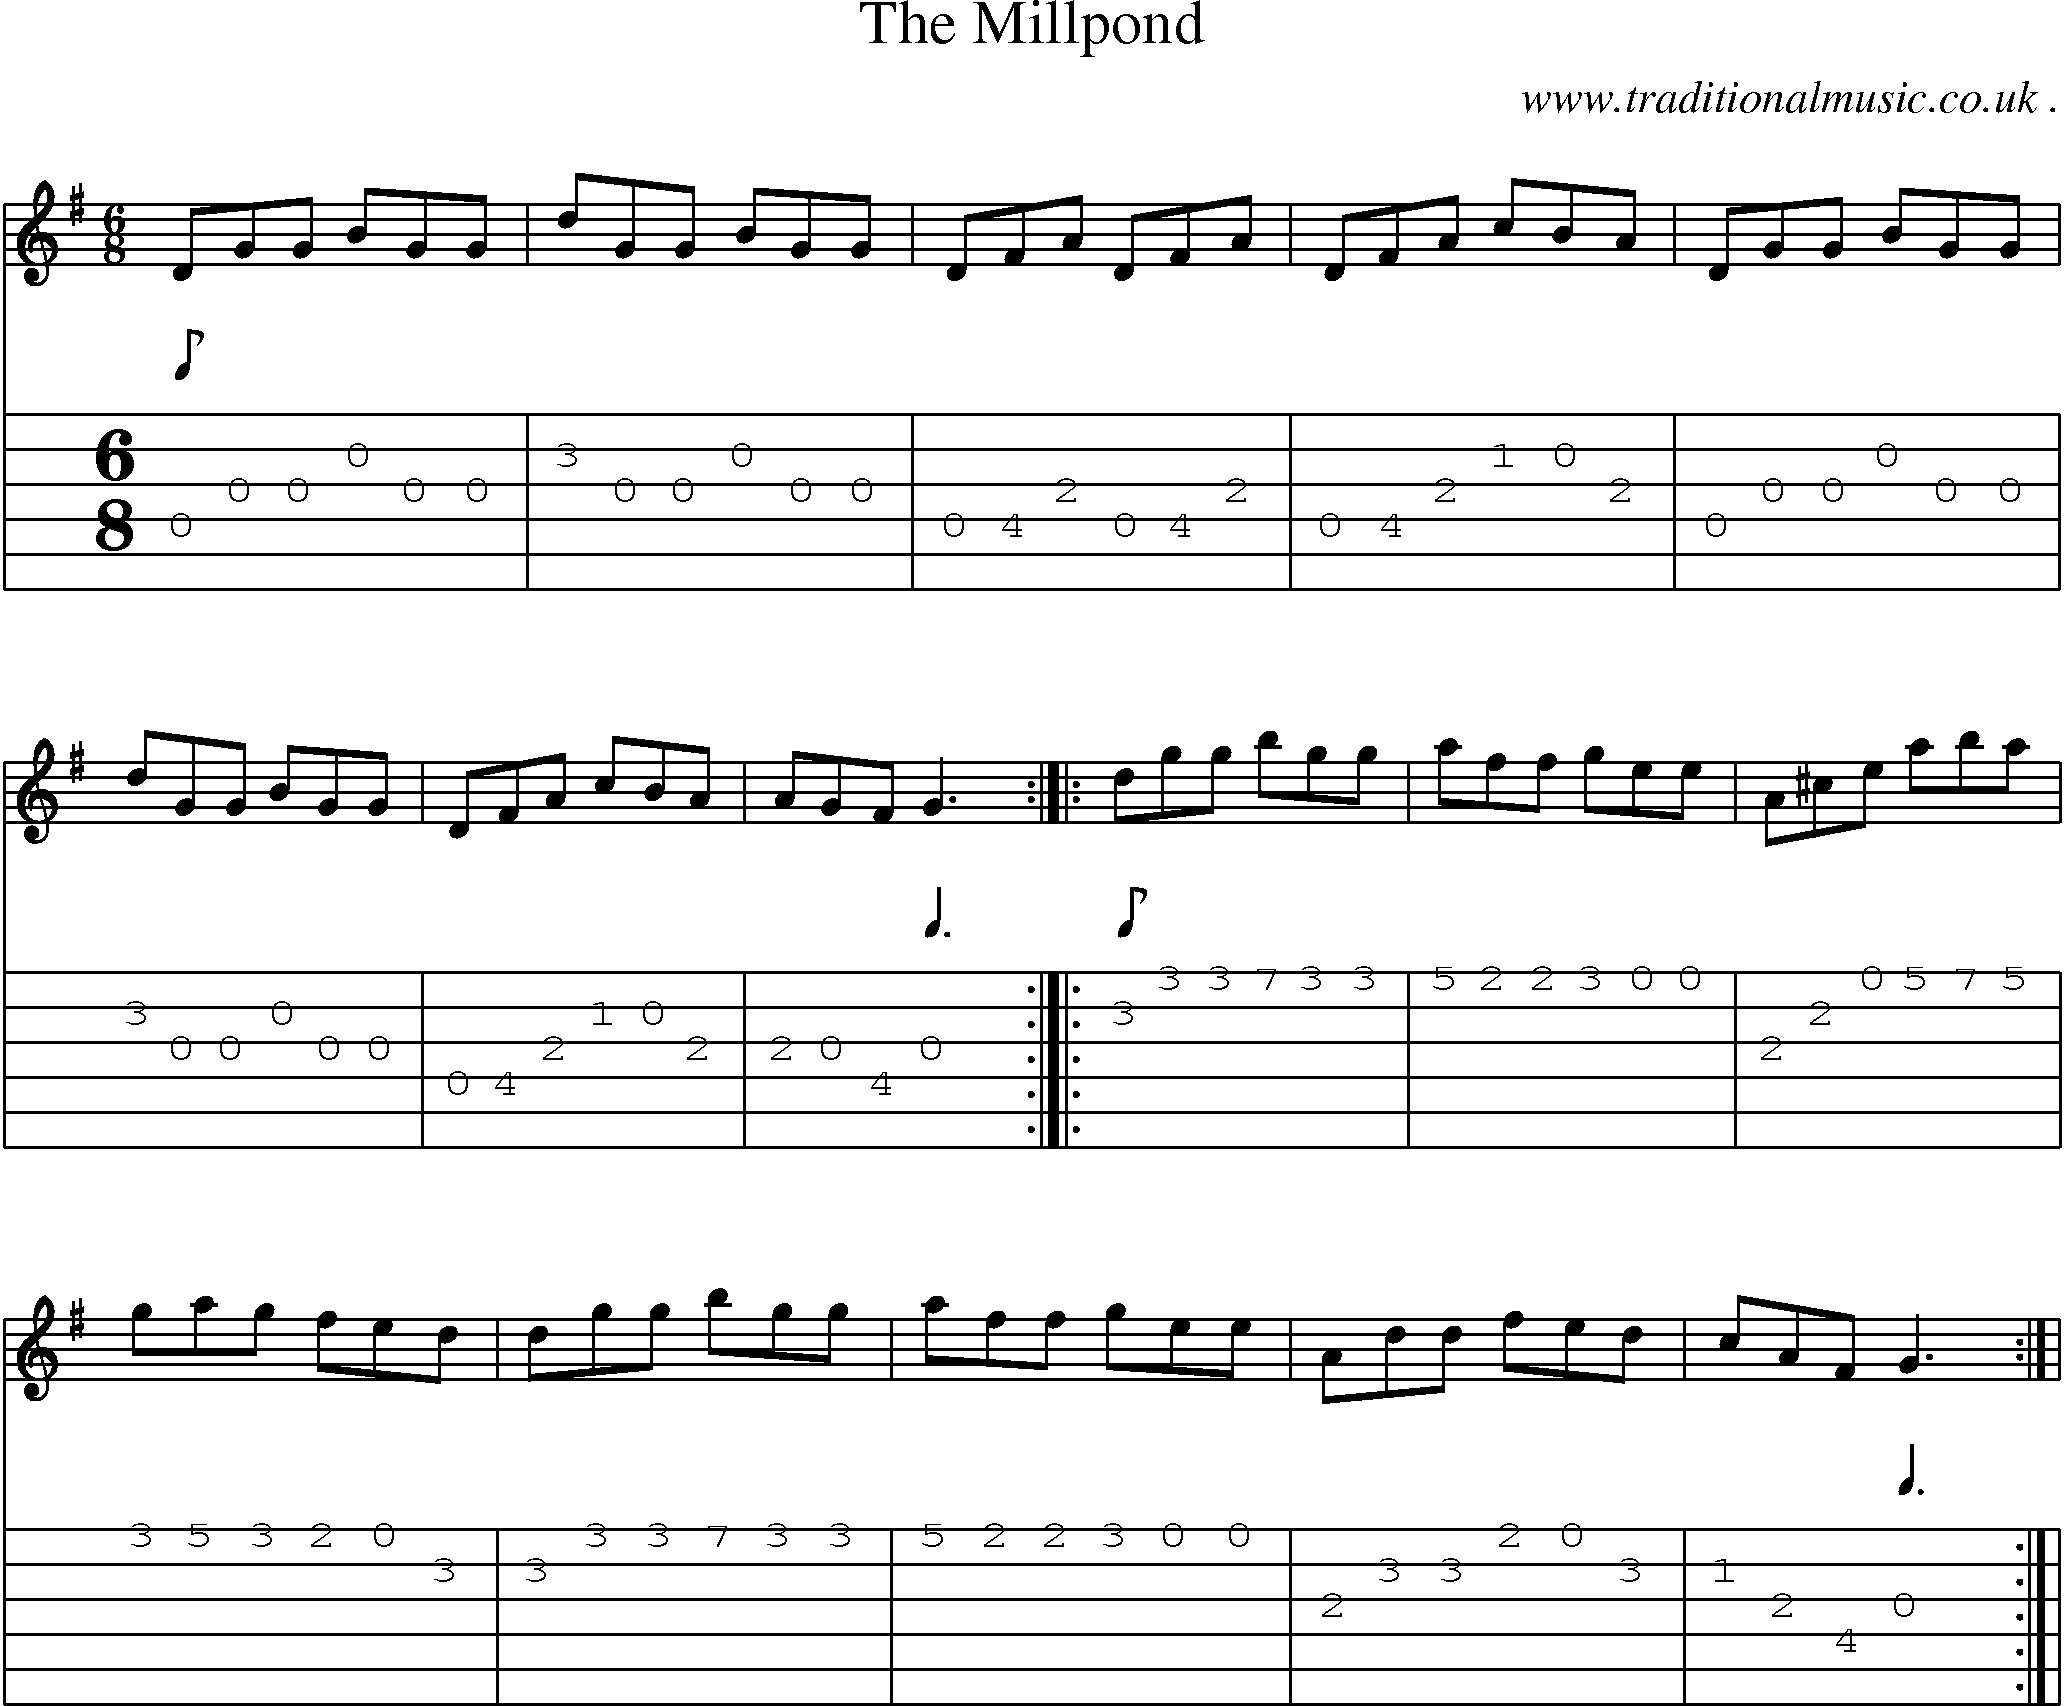 Sheet-Music and Guitar Tabs for The Millpond